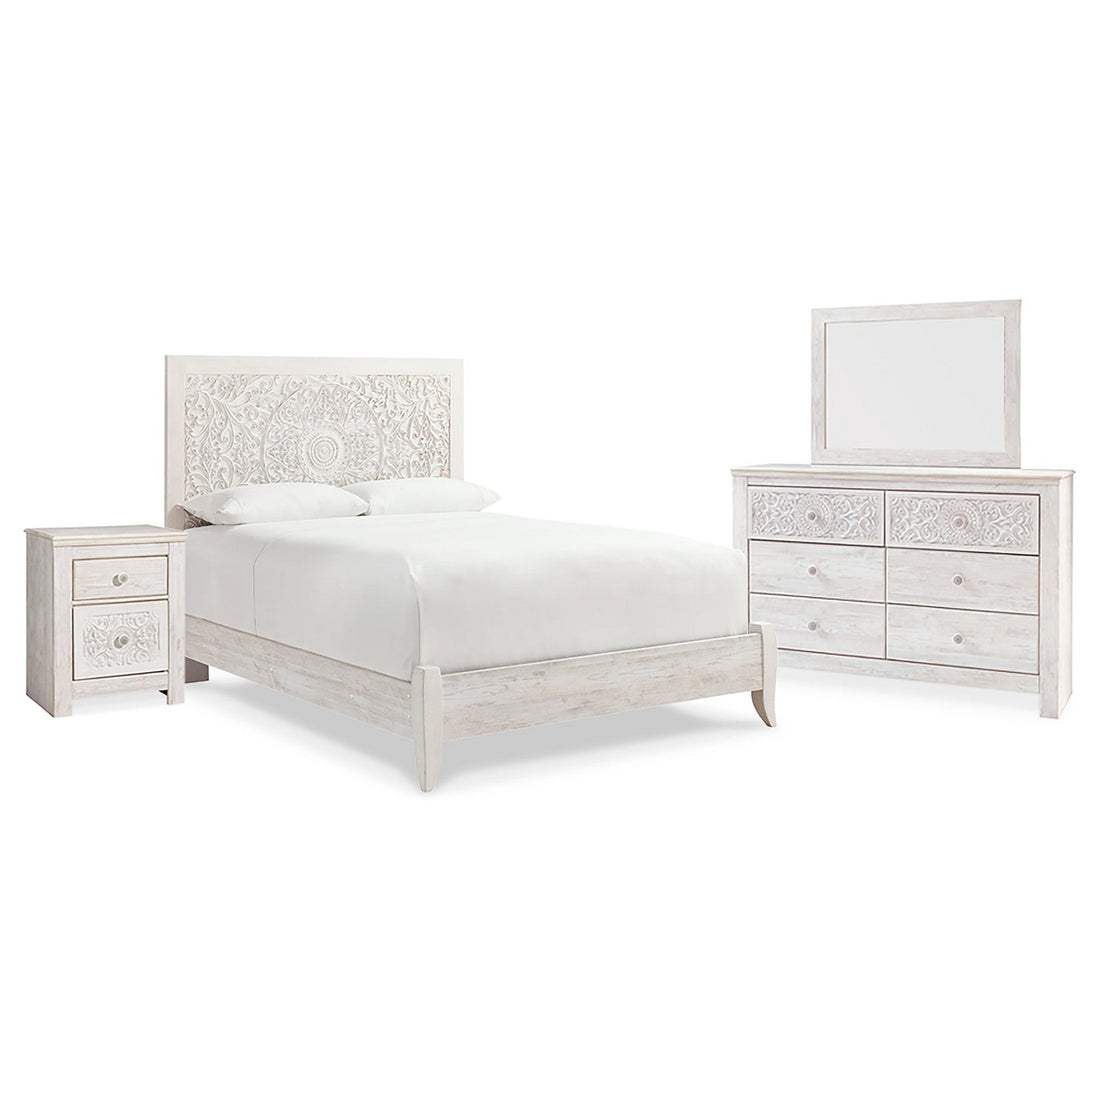 Paxberry Queen Panel Bed, Dresser, Mirror and Nightstand Ash-B181B16